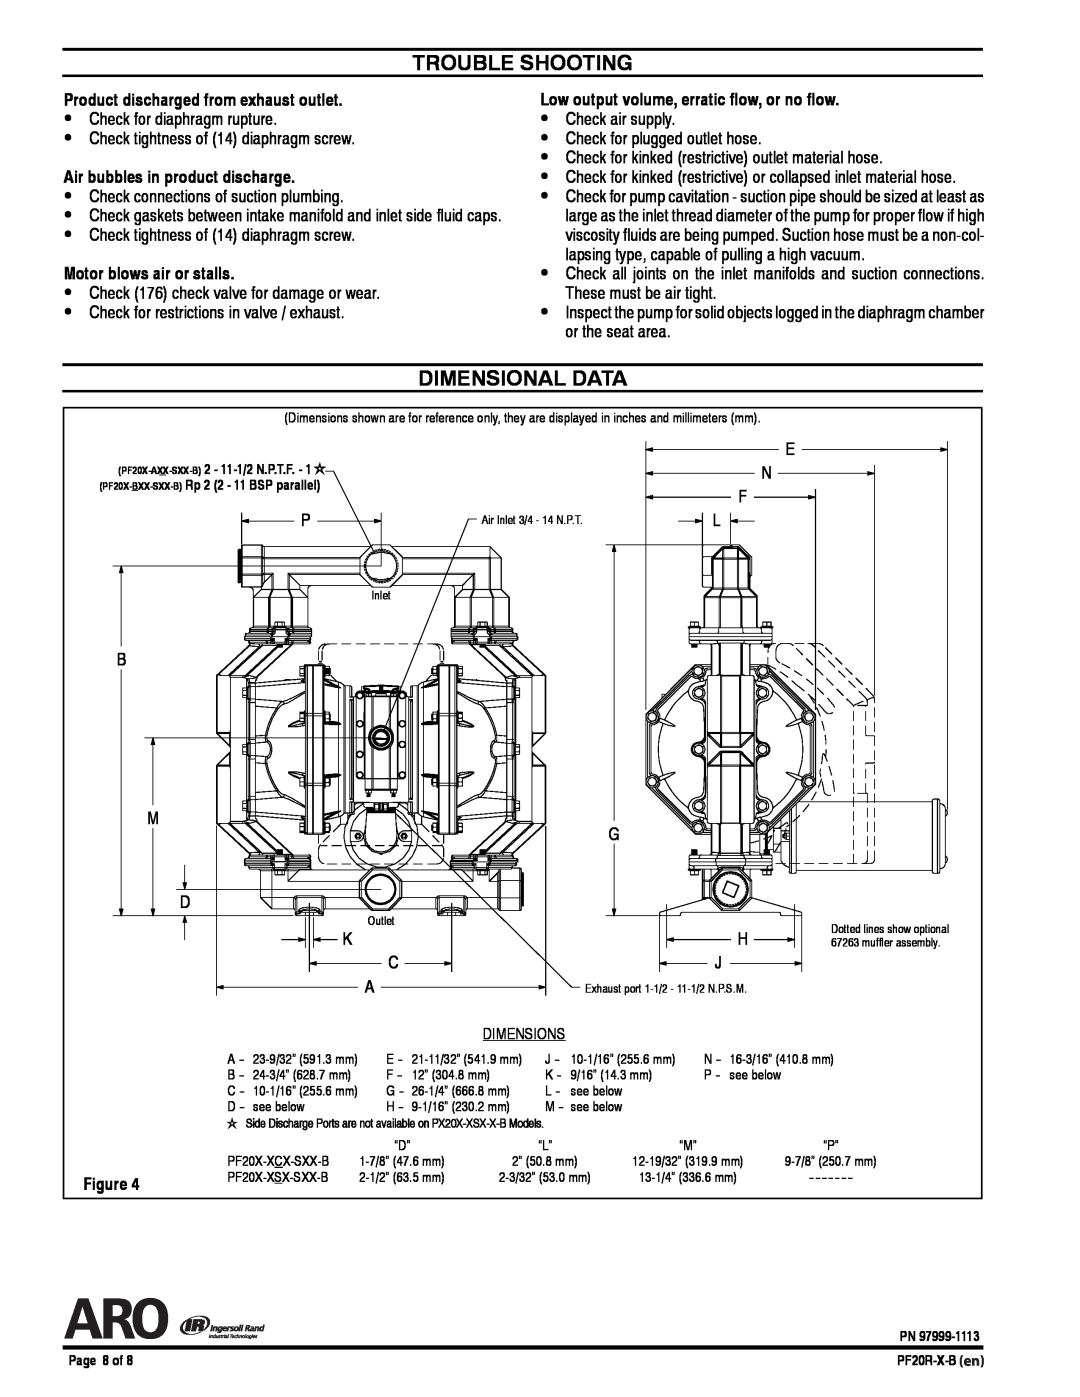 Ingersoll-Rand PF20R-X-B manual Trouble Shooting, Dimensional Data, Product discharged from exhaust outlet 